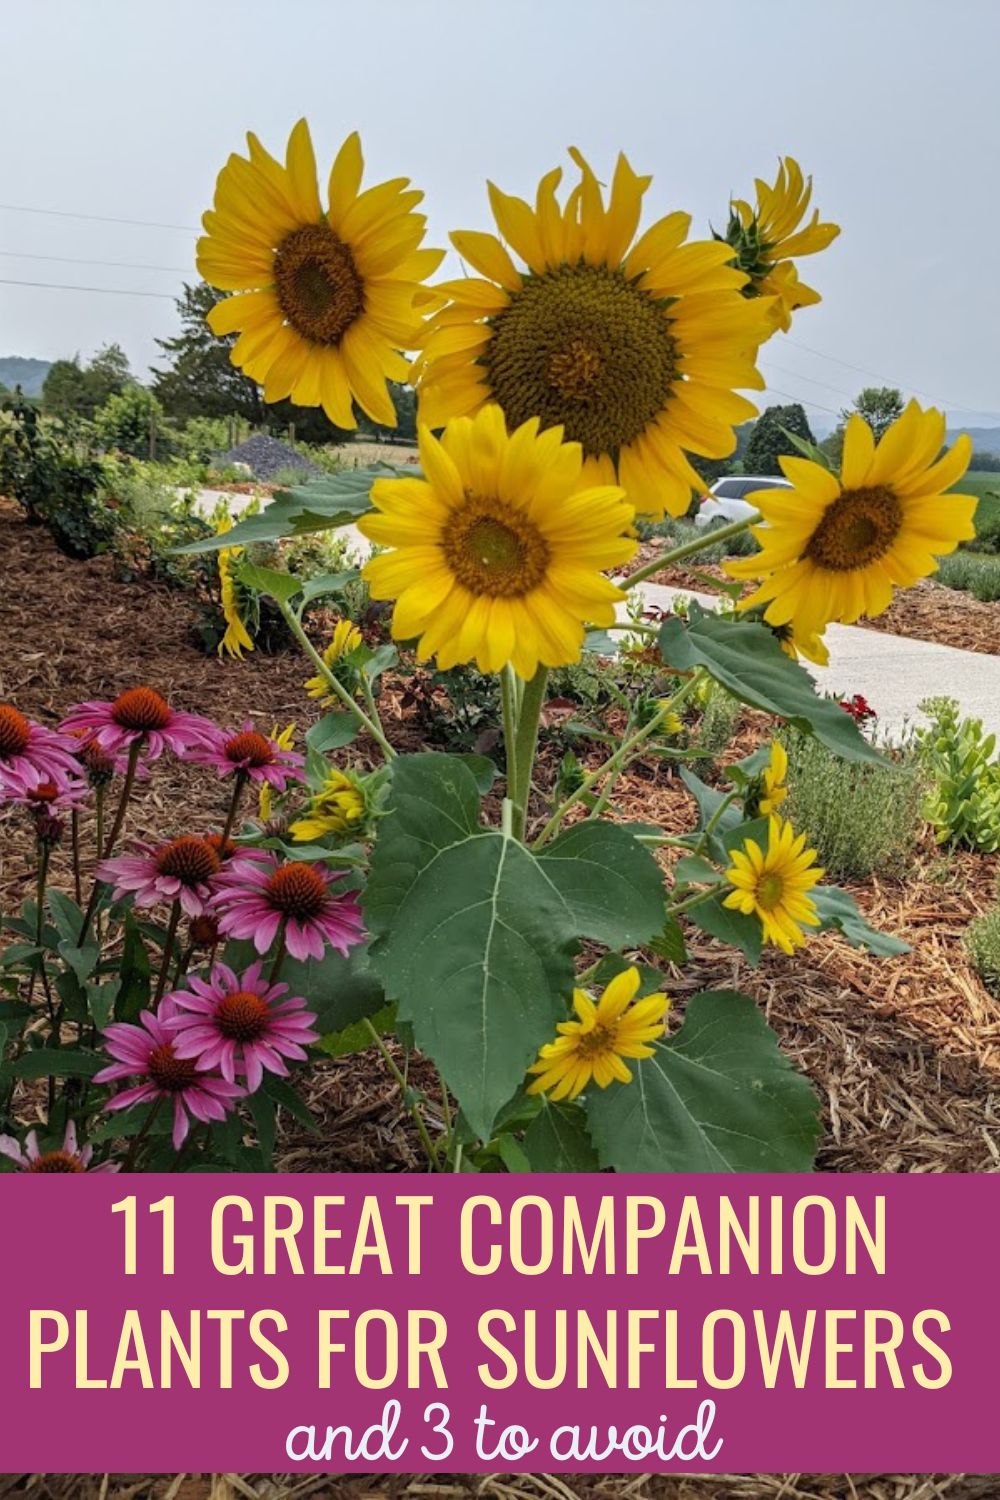 11 great companion plants for sunflowers and 3 to avoid.